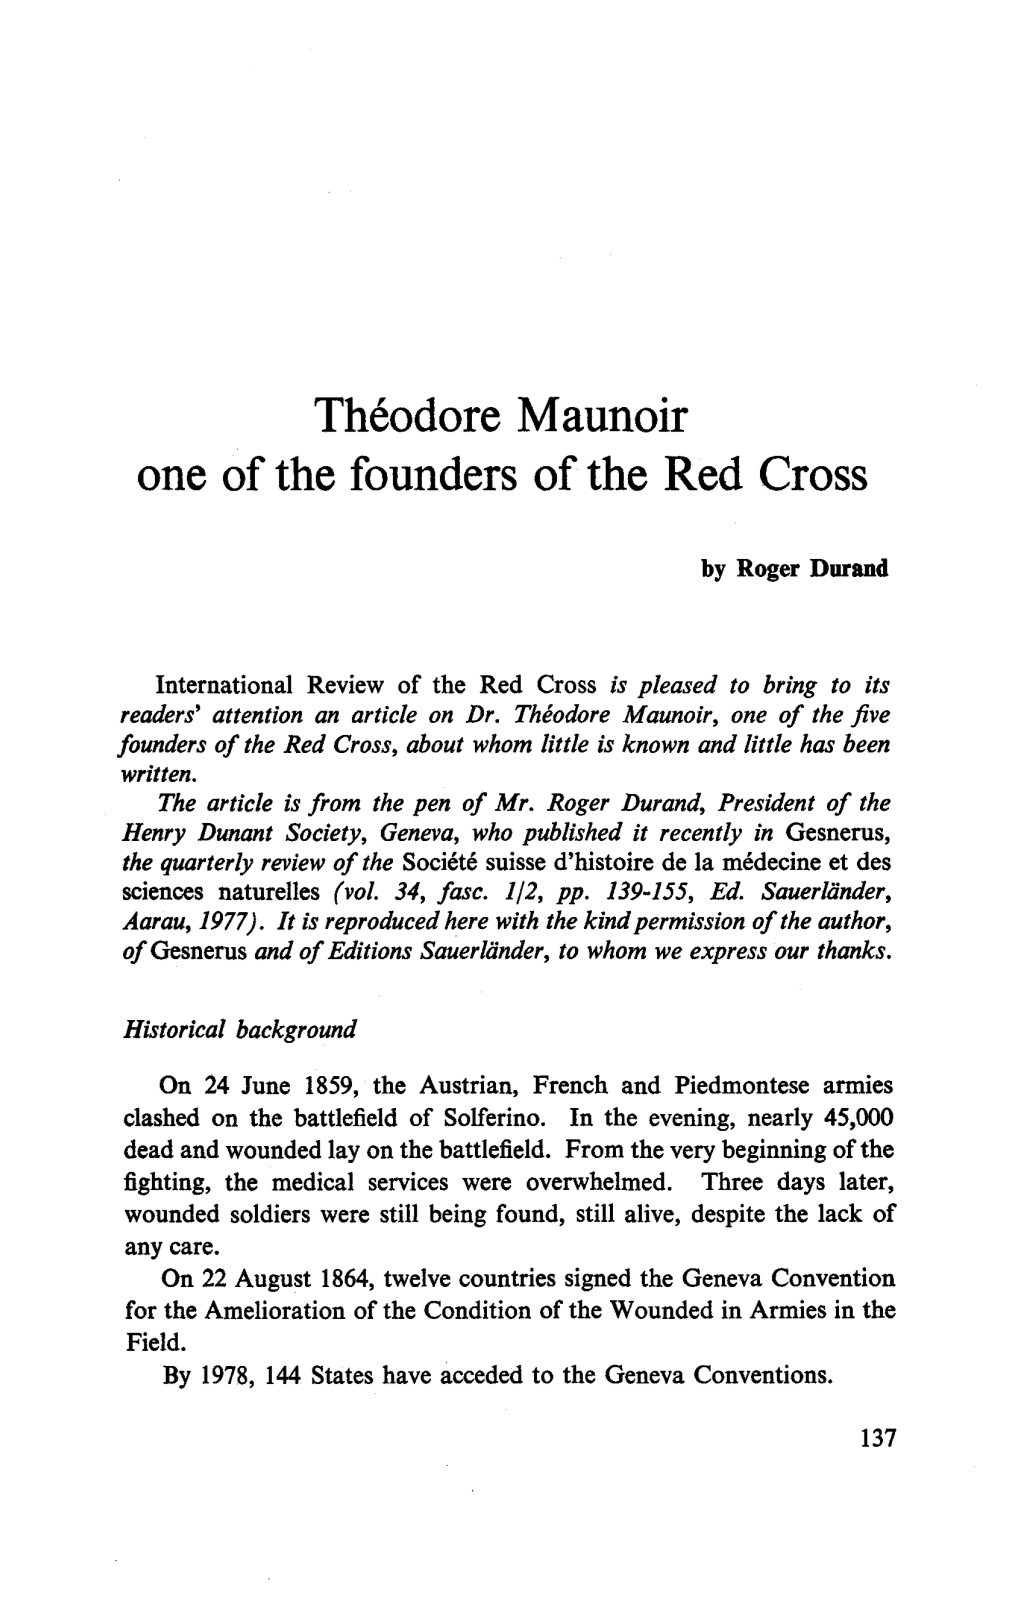 Theodore Maunoir One of the Founders of the Red Cross